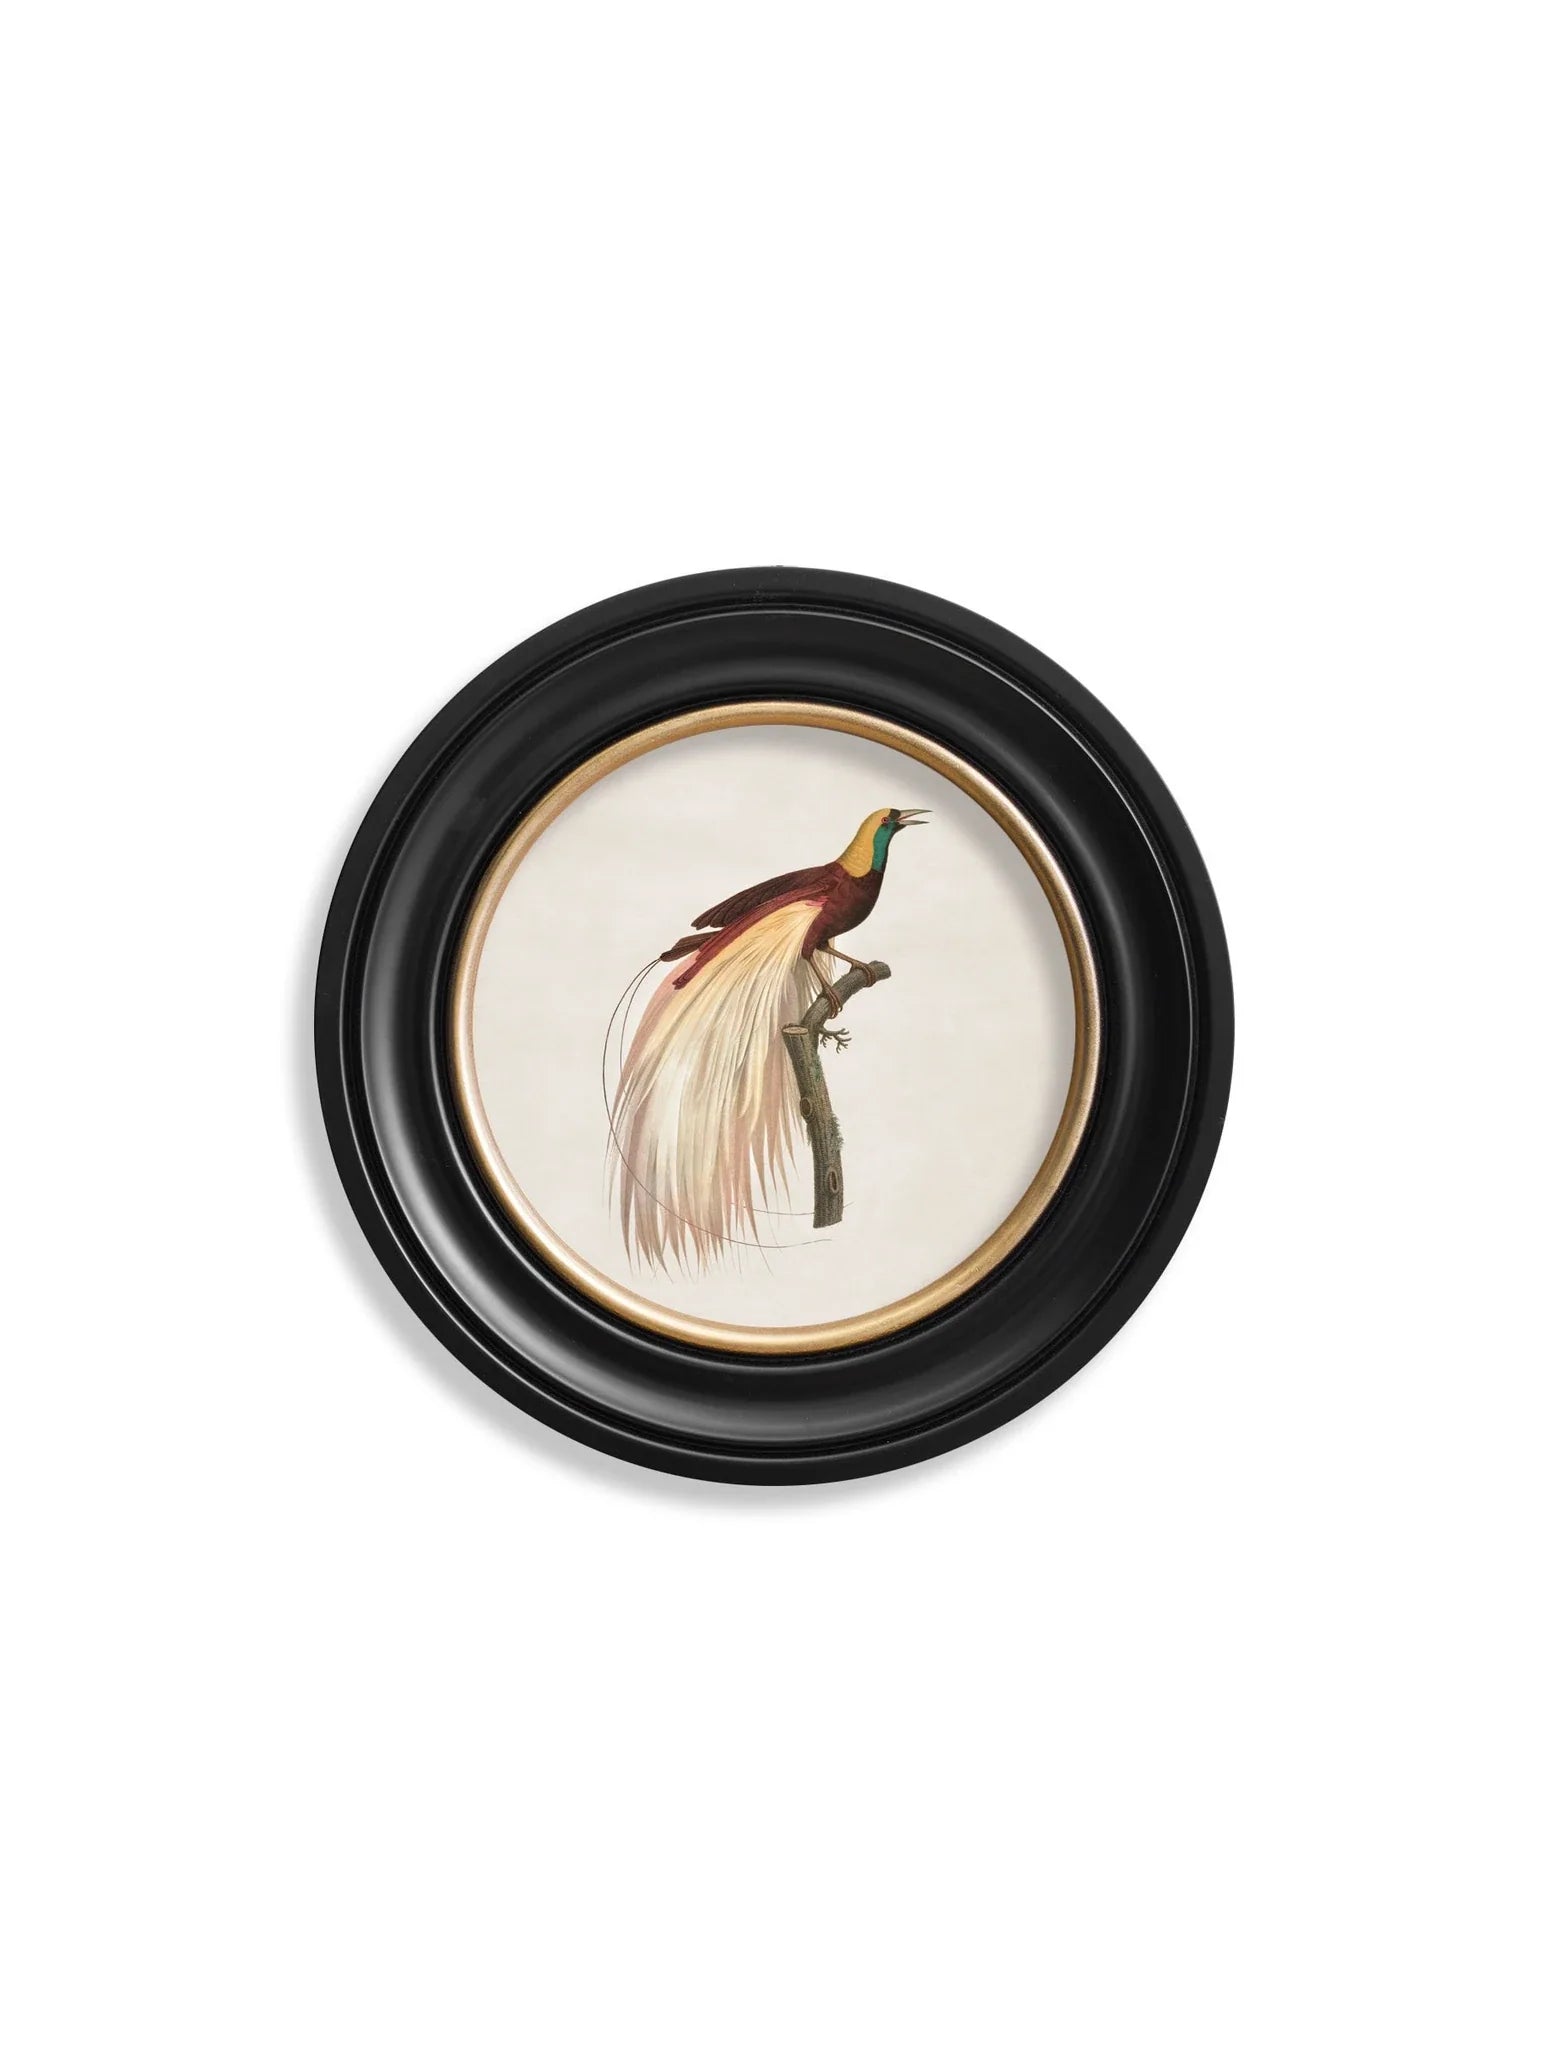 C.1809 Birds of Paradise - Round Frames for sale - Woodcock and Cavendish